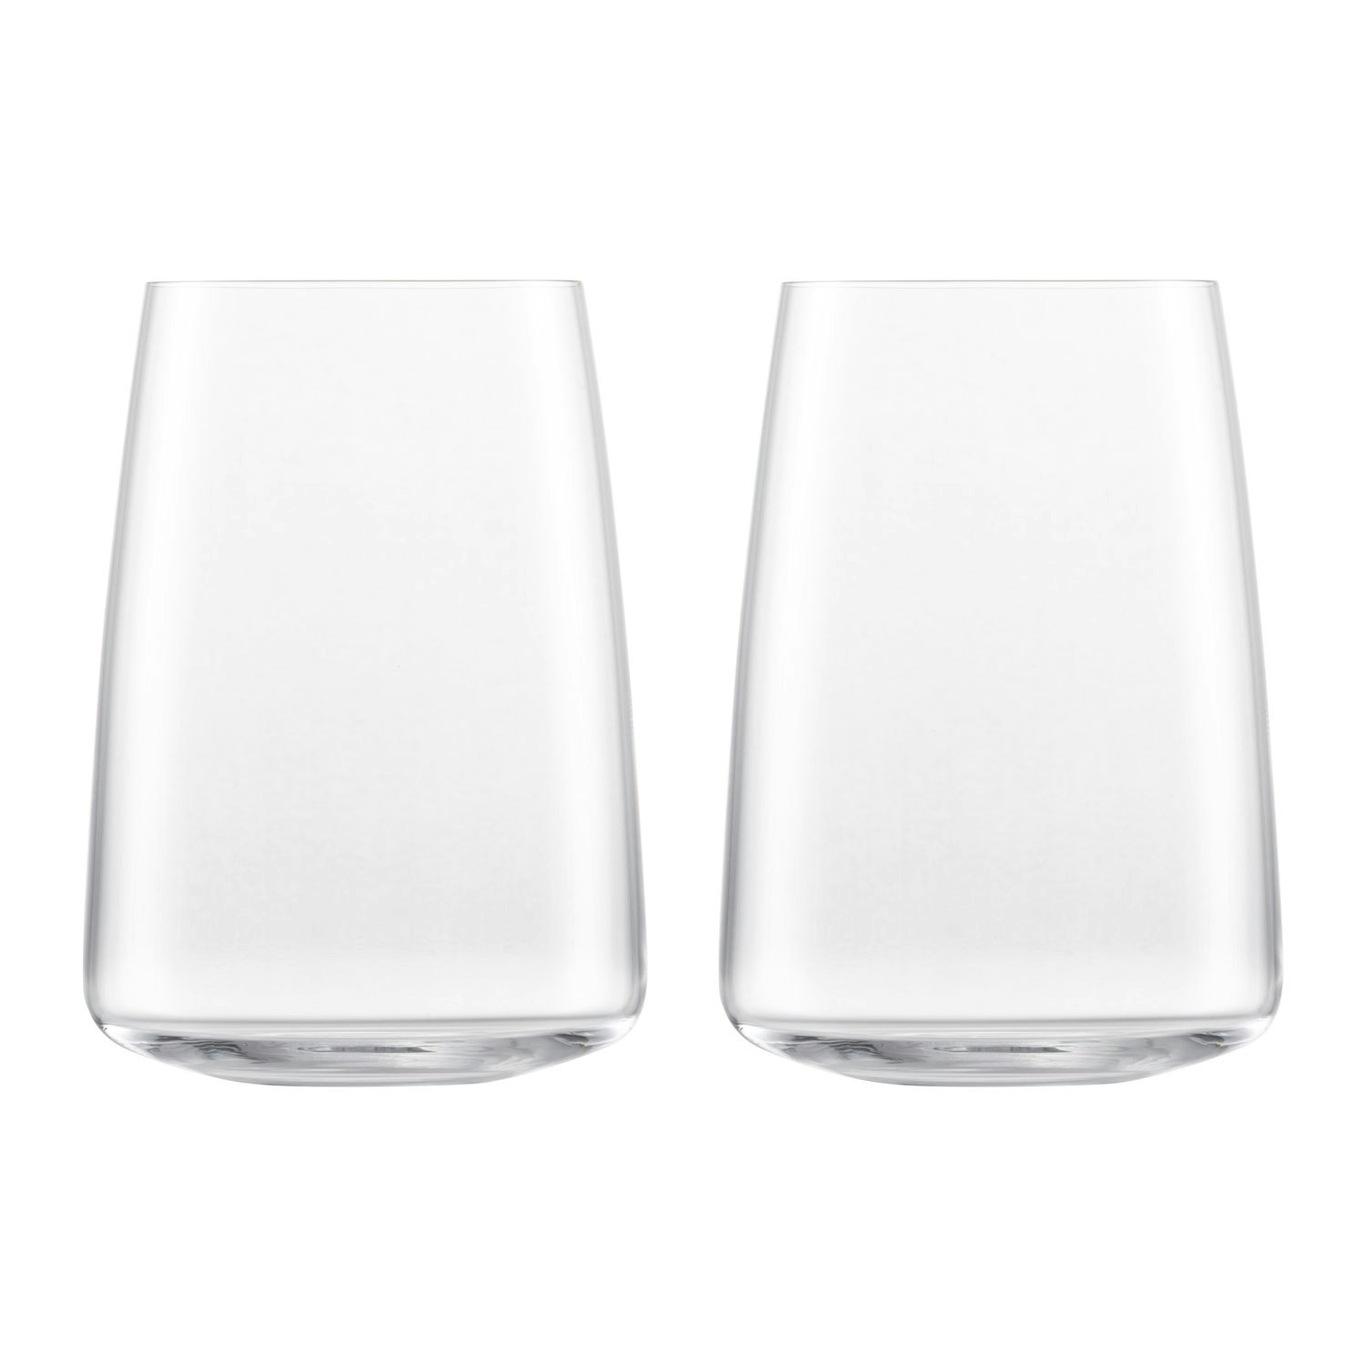 https://royaldesign.com/image/2/zwiesel-simplify-drinking-glass-53-cl-2-pack-0?w=800&quality=80